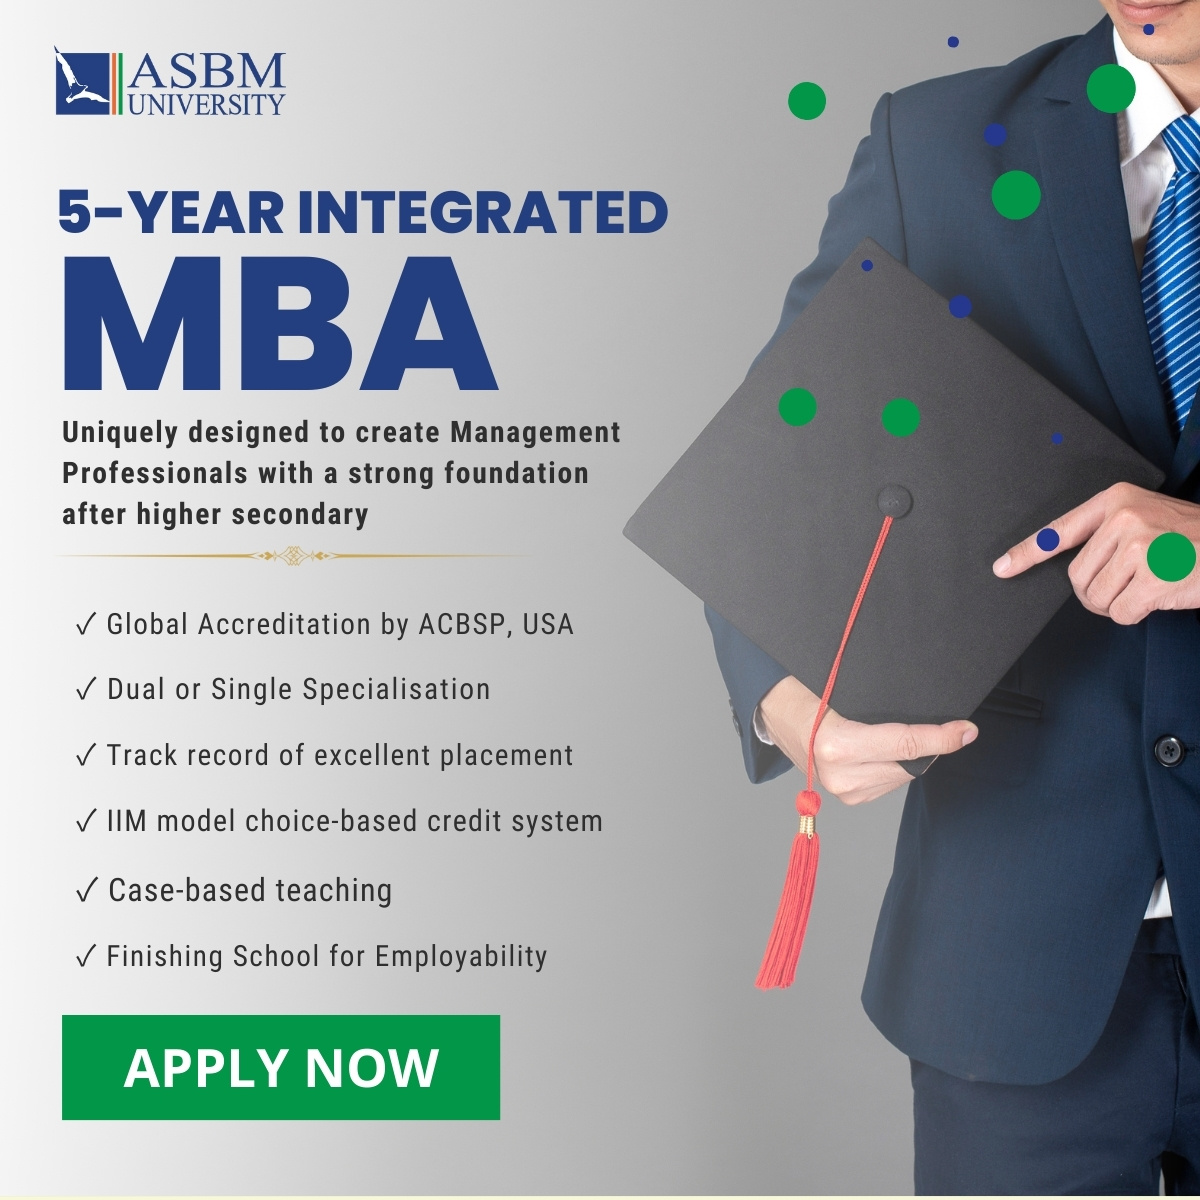 5 Year - Integrated MBA